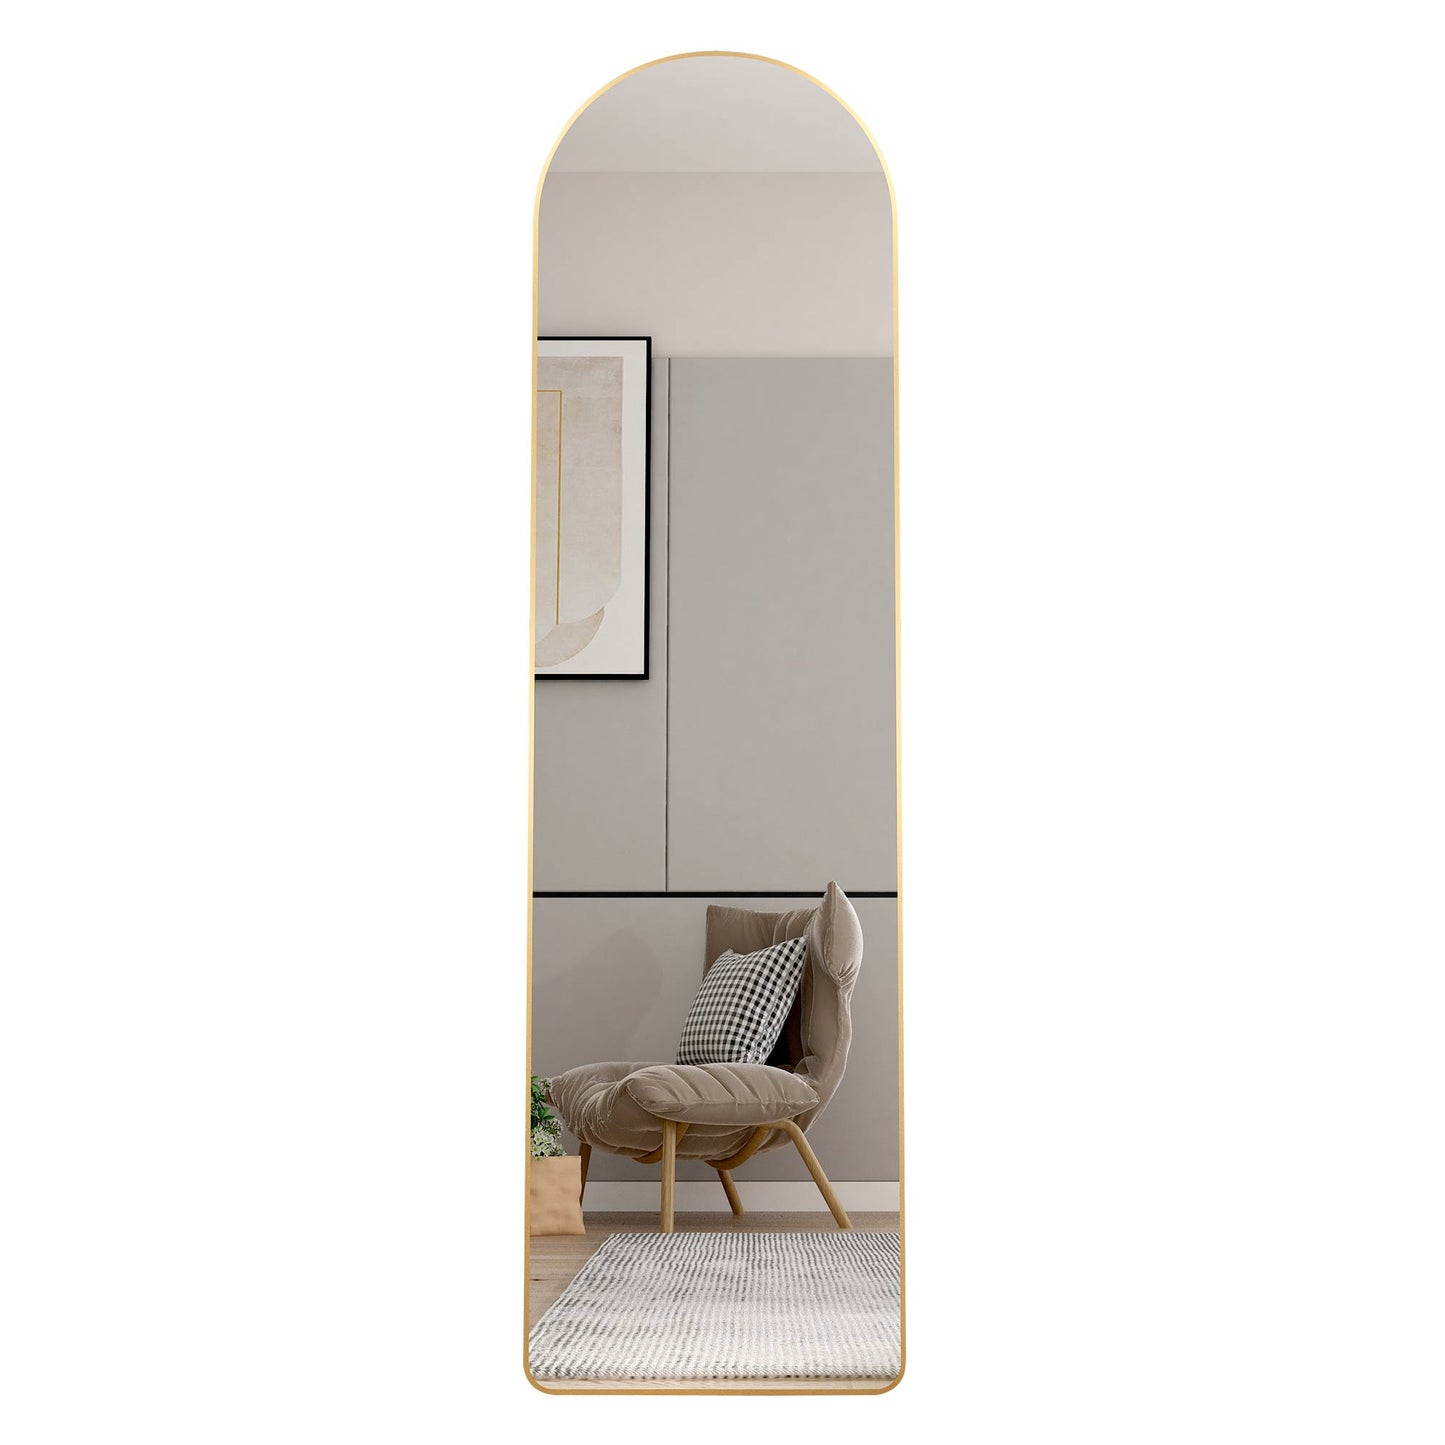 The 1st generation of floor mounted full length mirrors Aluminum alloy metal frame arched wall mirror bathroom makeup mirror